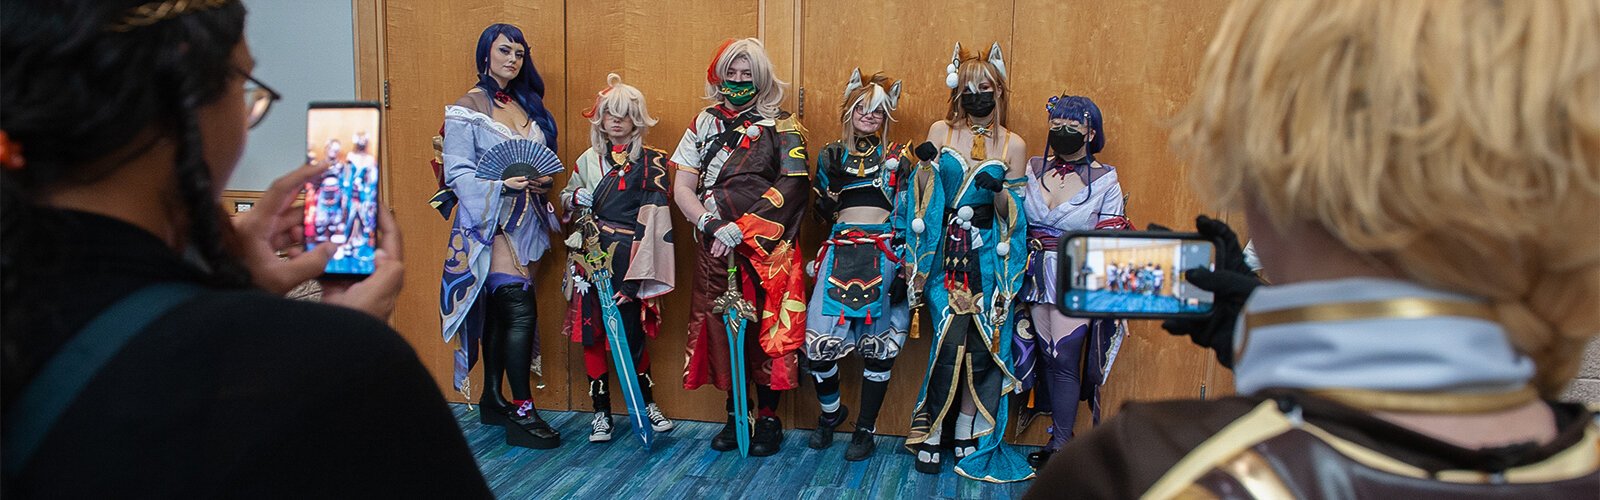 A group dressed as characters from “Genshin Impact” had a lot of requests for photographs at the Tampa Bay Comic Con.